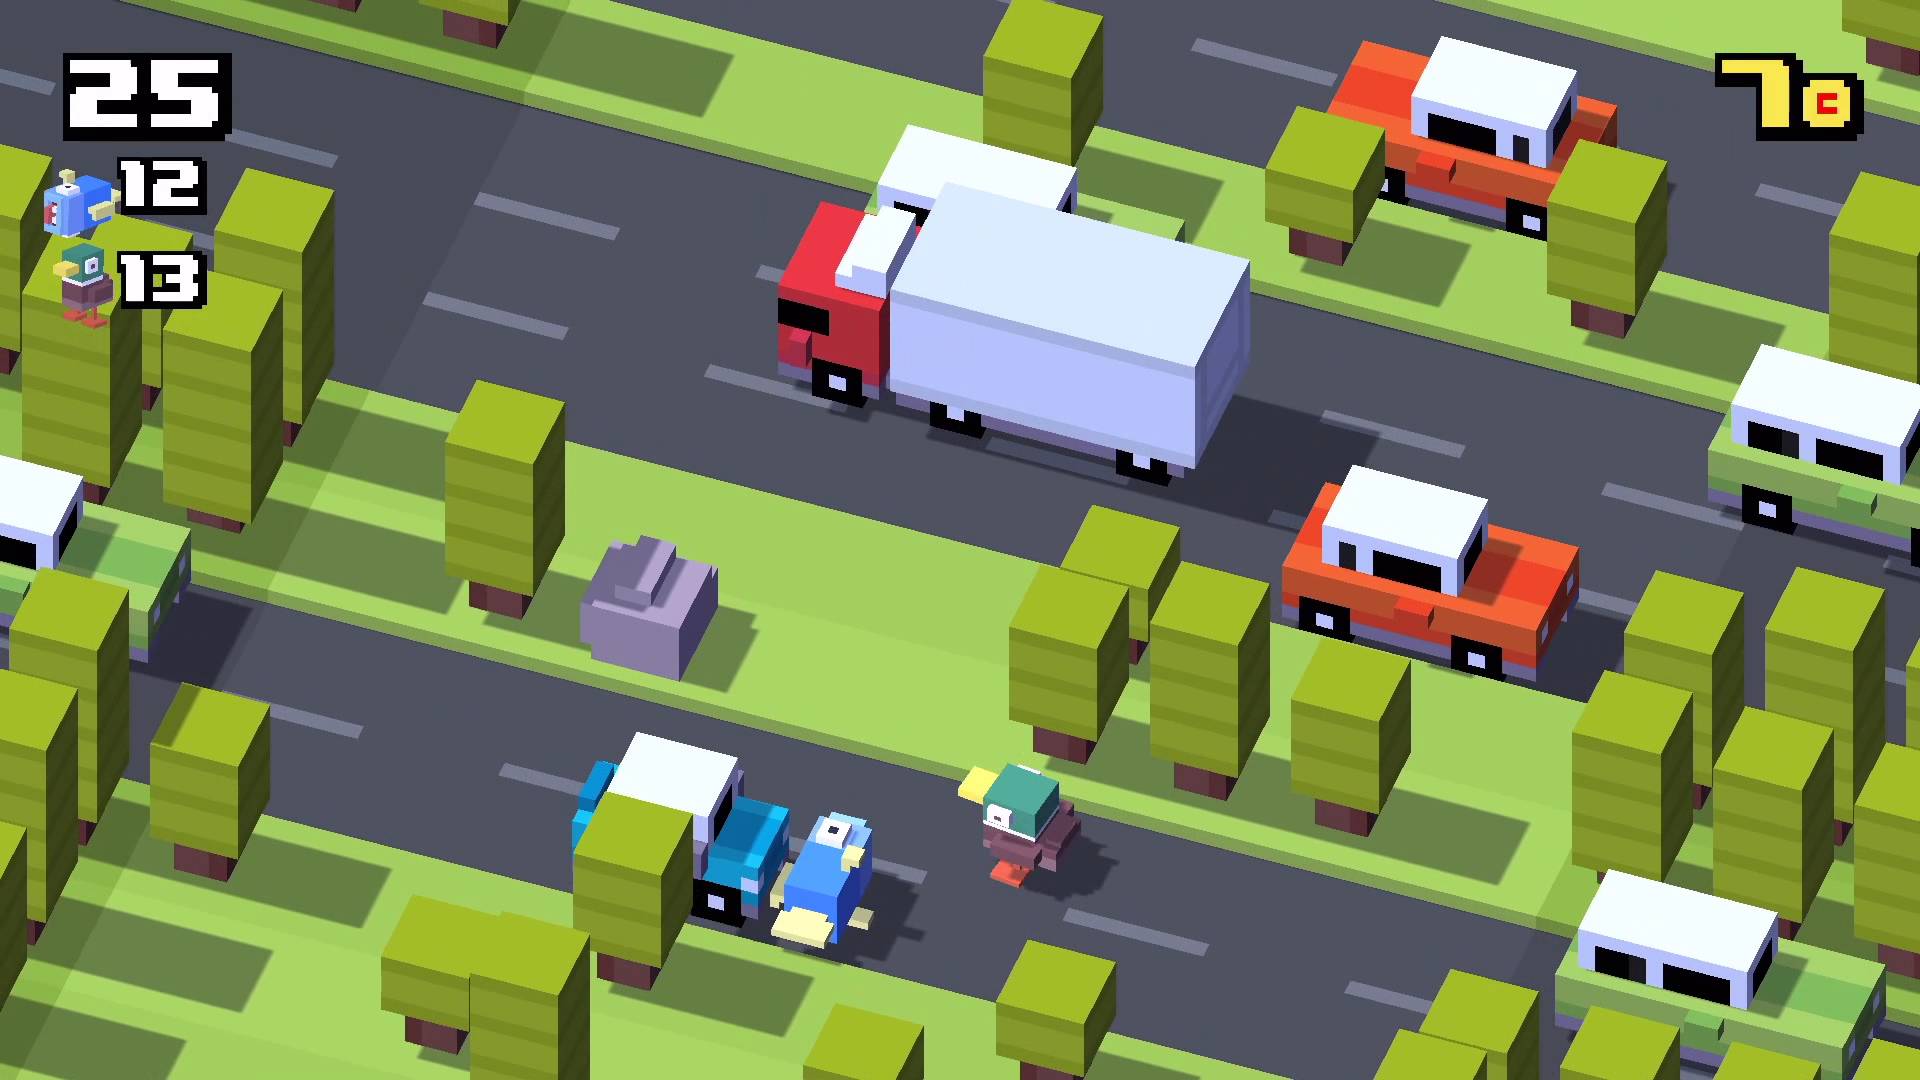 Hit game Crossy Road+ is now available for download in Apple